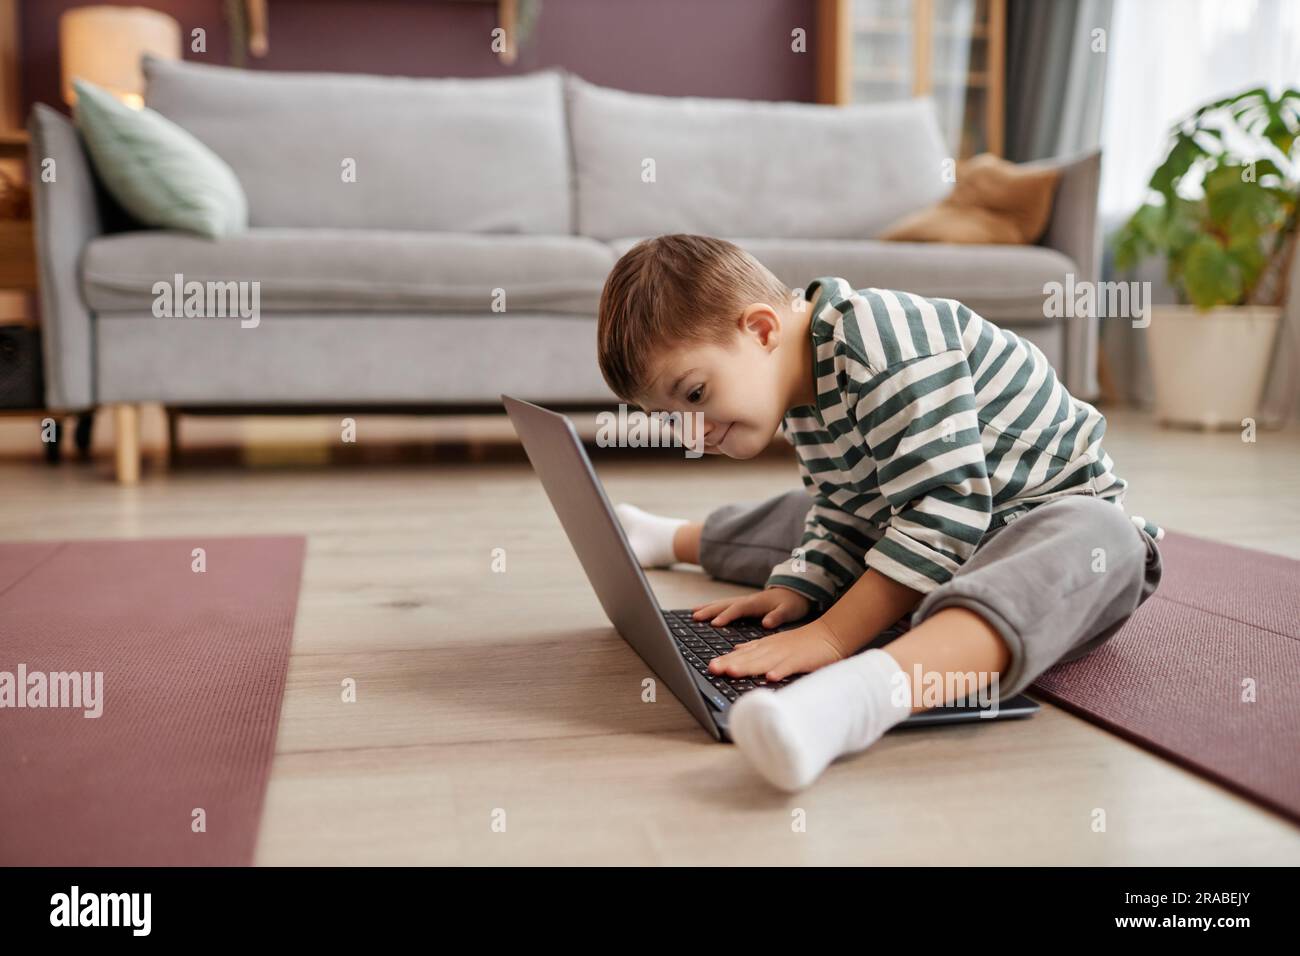 Full length side view portrait of curious little boy with down syndrome using laptop while sitting on floor at home, copy space Stock Photo